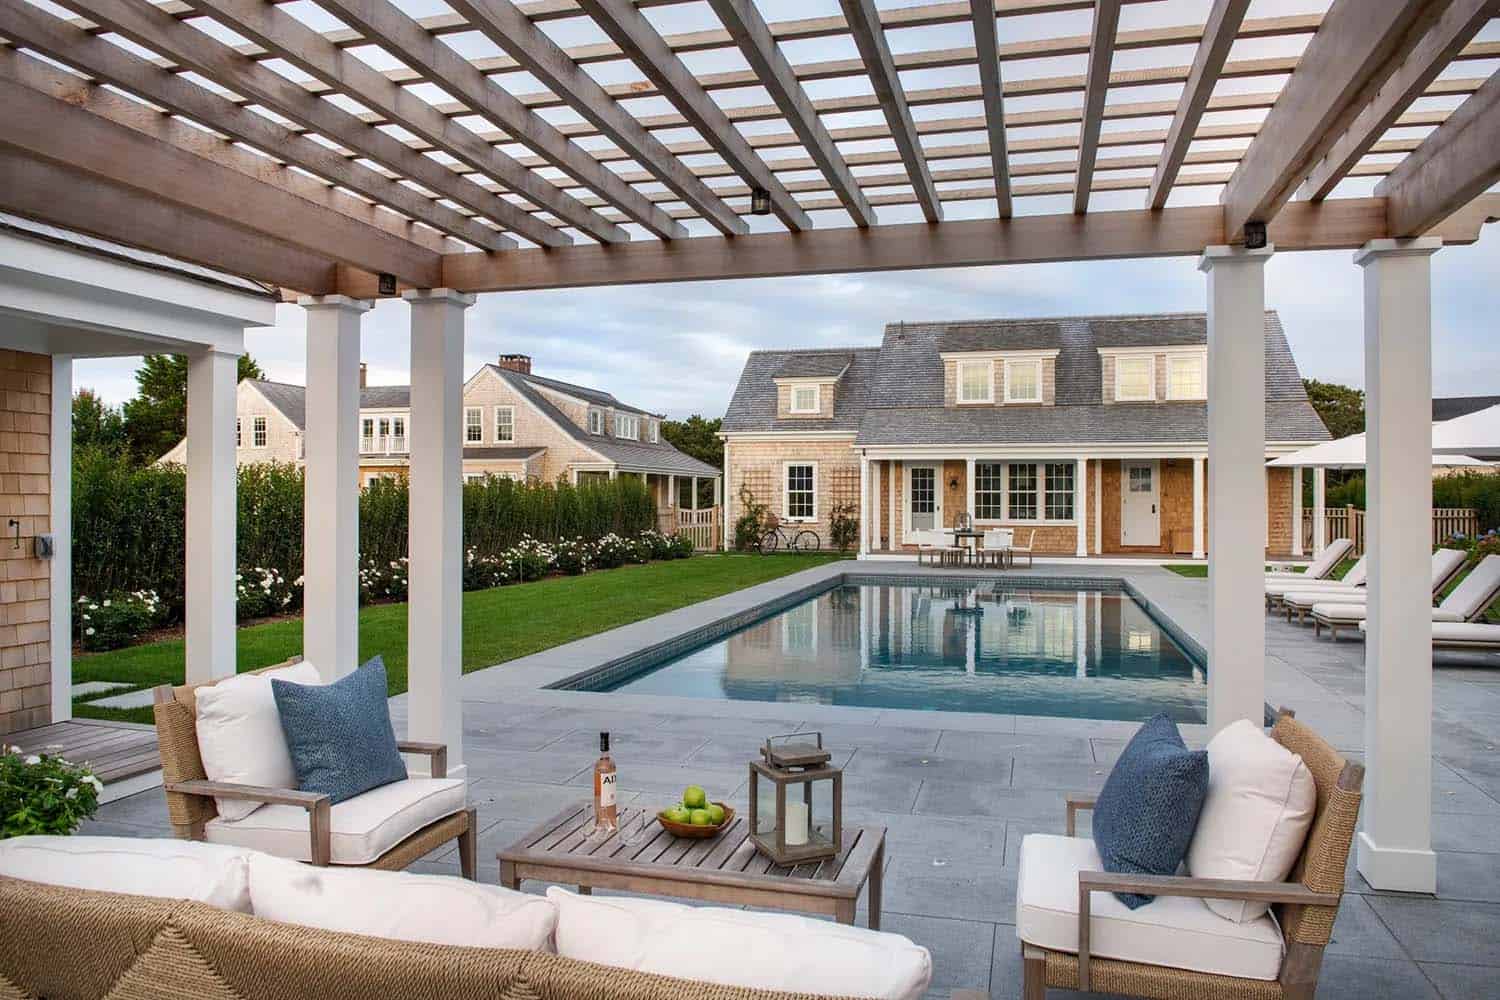 coastal style trellis and outdoor furniture with a view of the swimming pool 